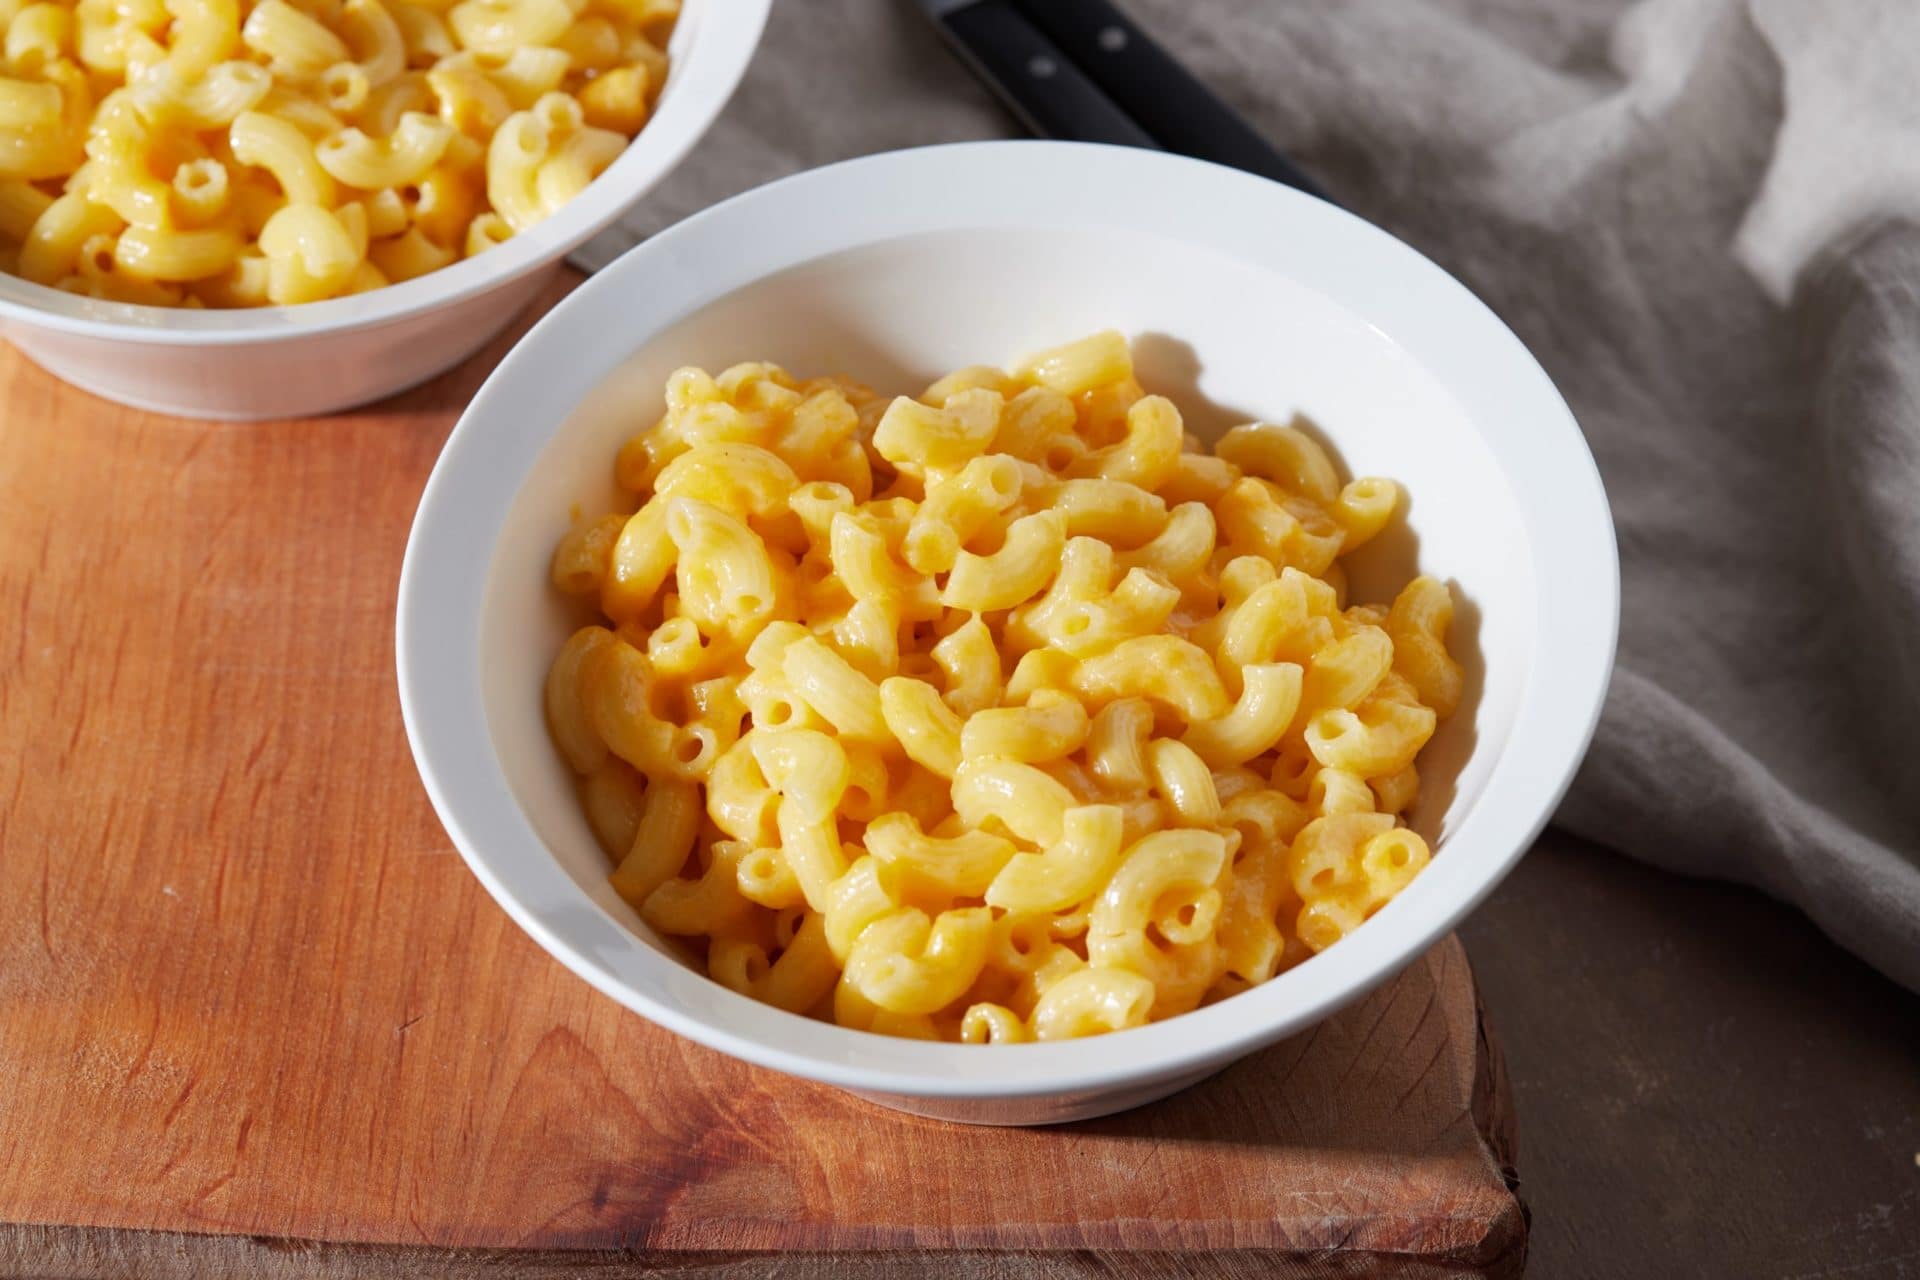 Mikrós mac and cheese